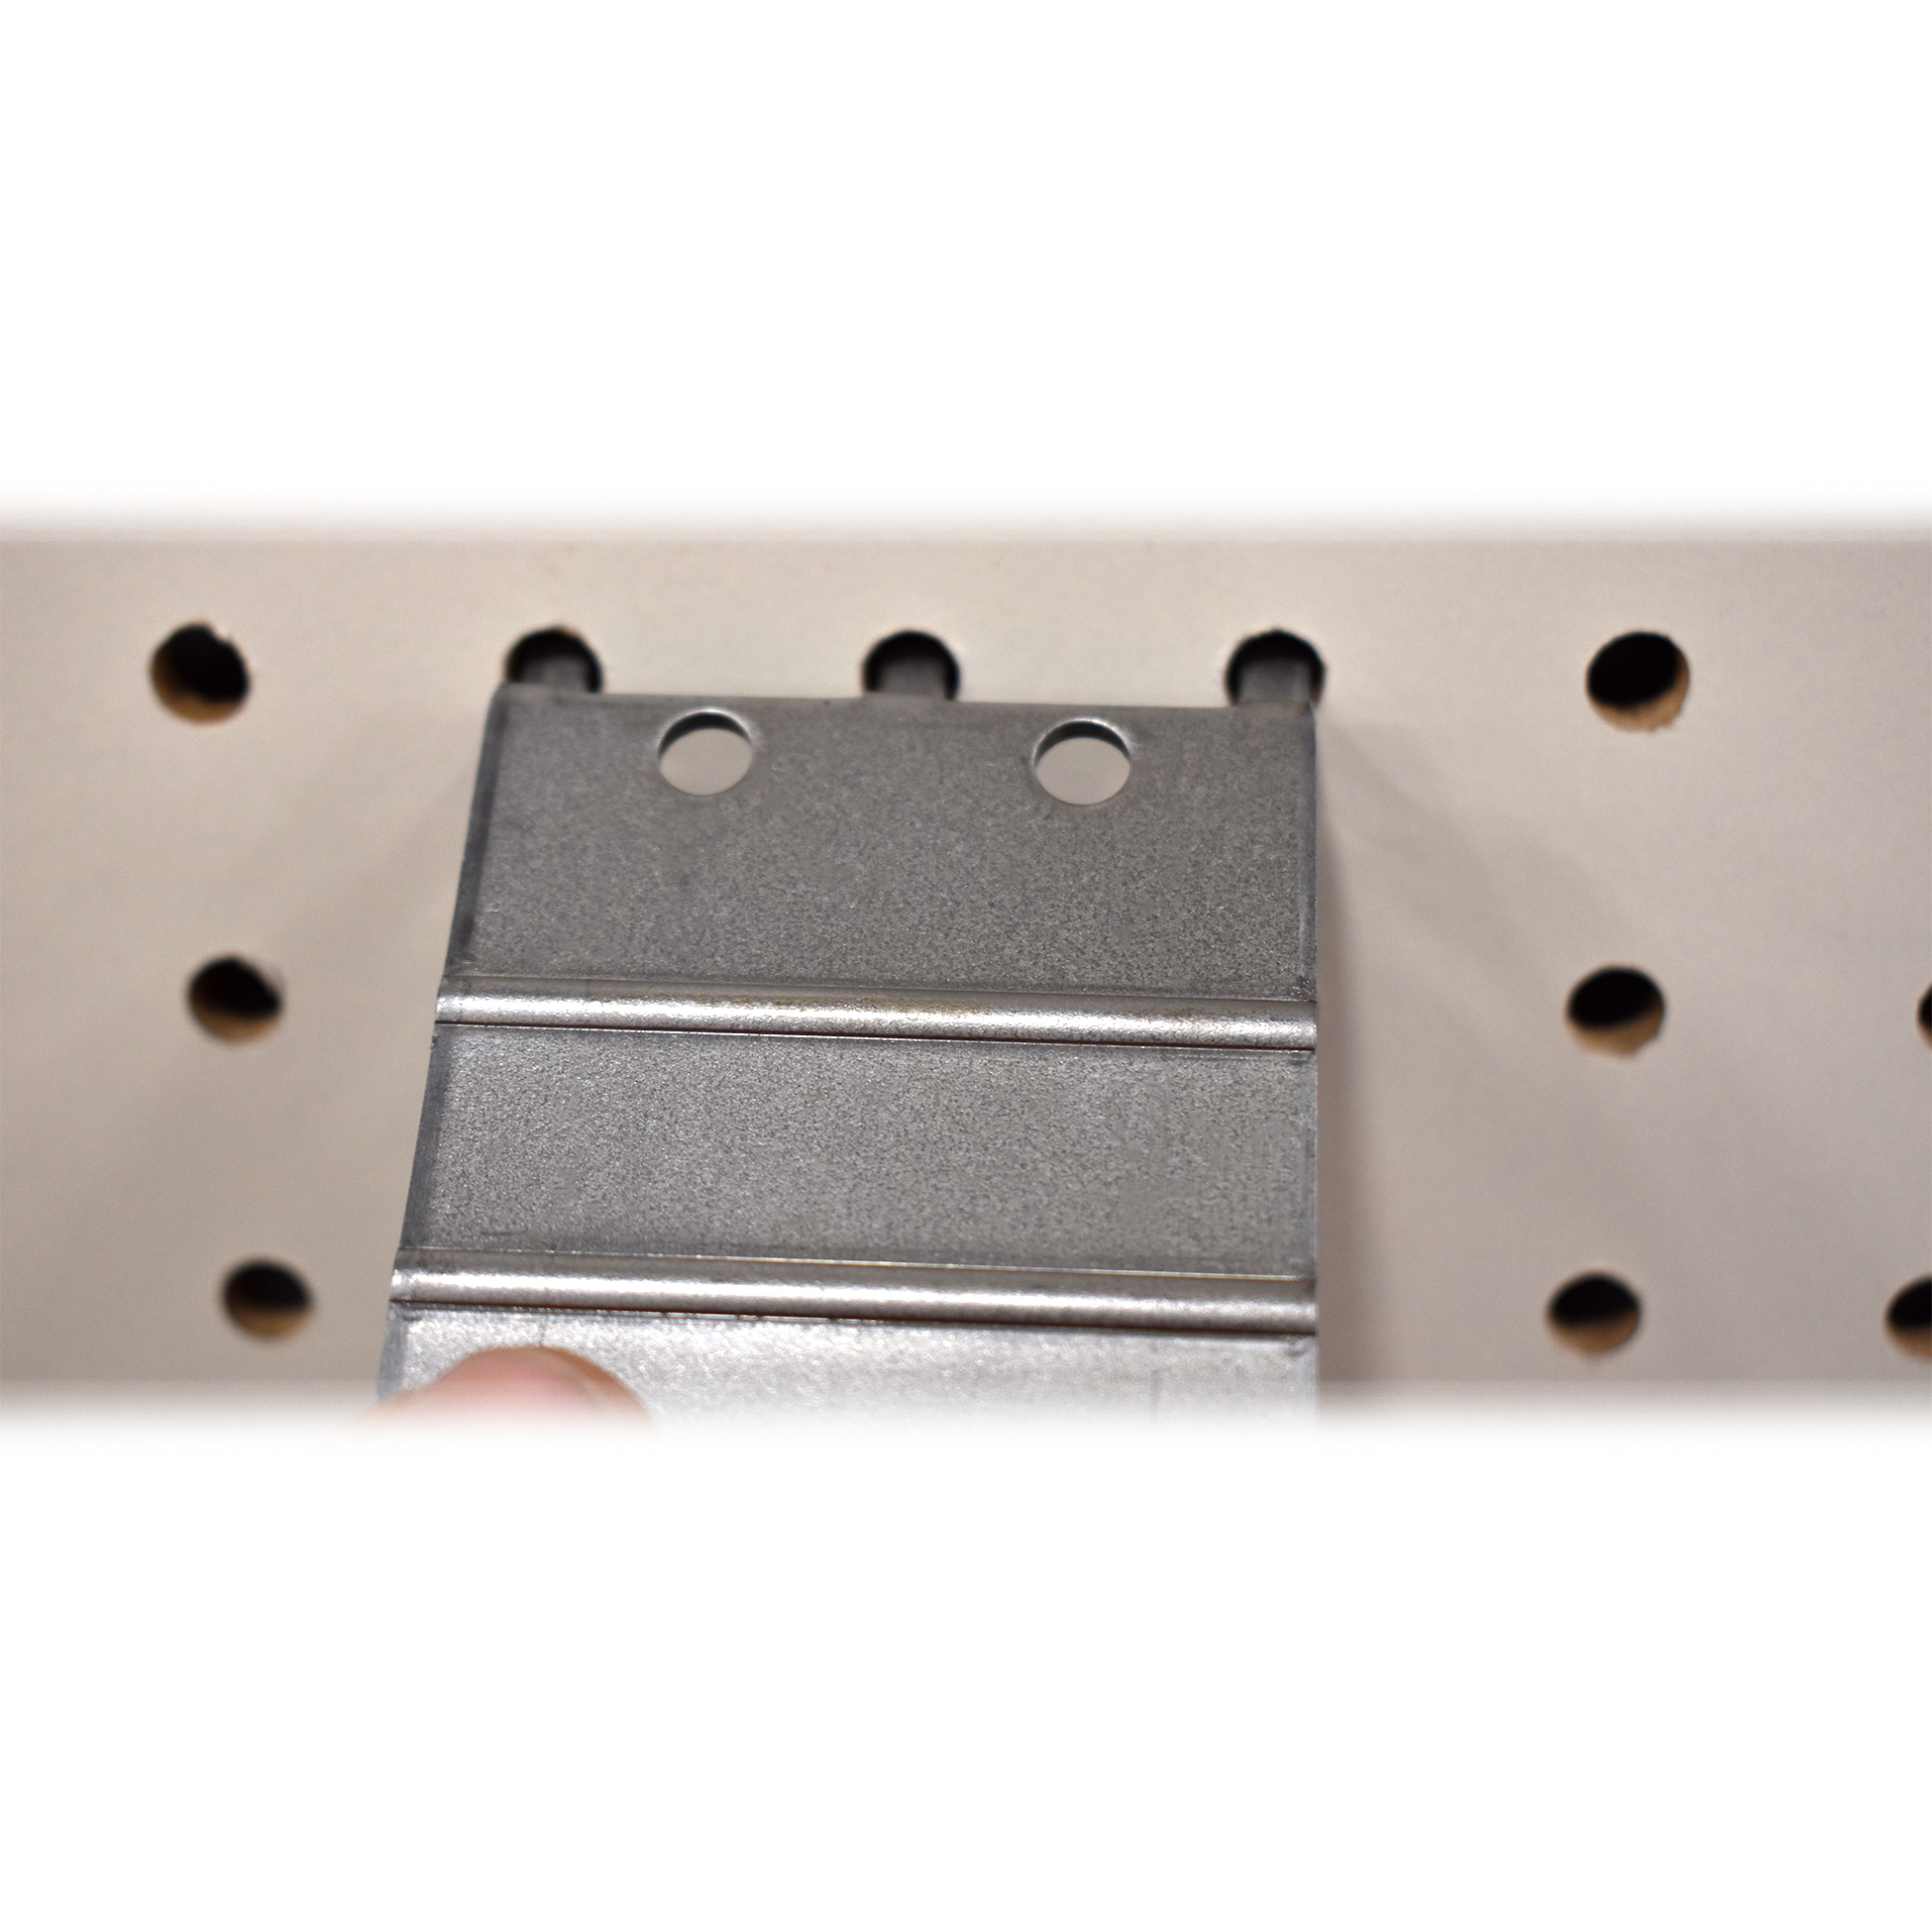 Pegboard Metal Plate Mount, Backplate Mounting Adapter to Make Items  Pegboard Compatible, Pack